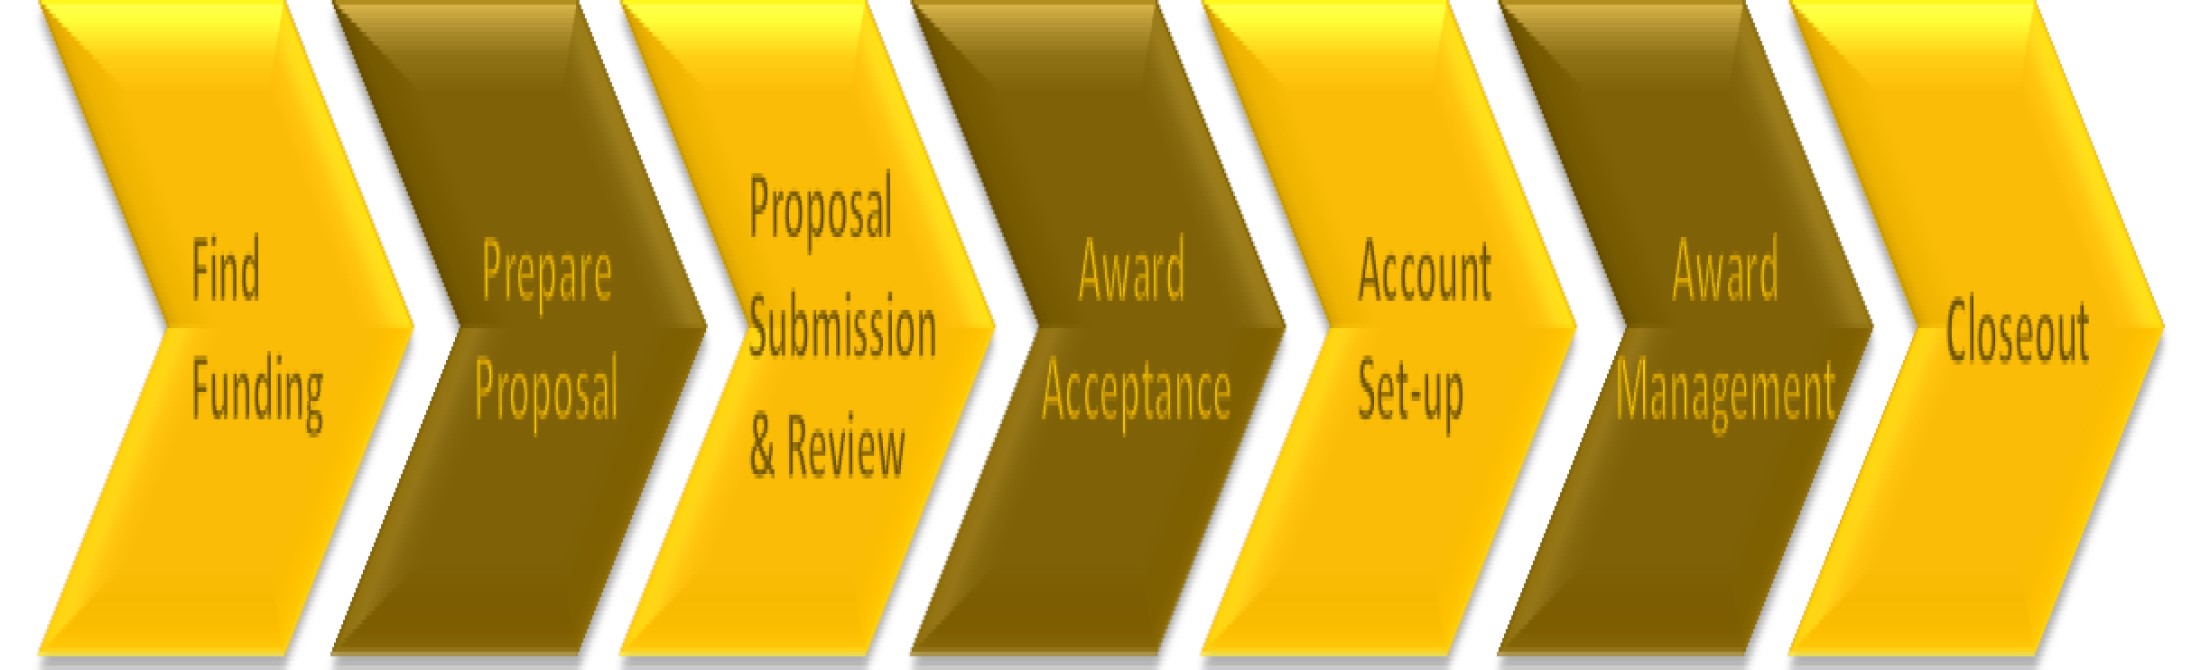 Research proposal process - funding to closeout